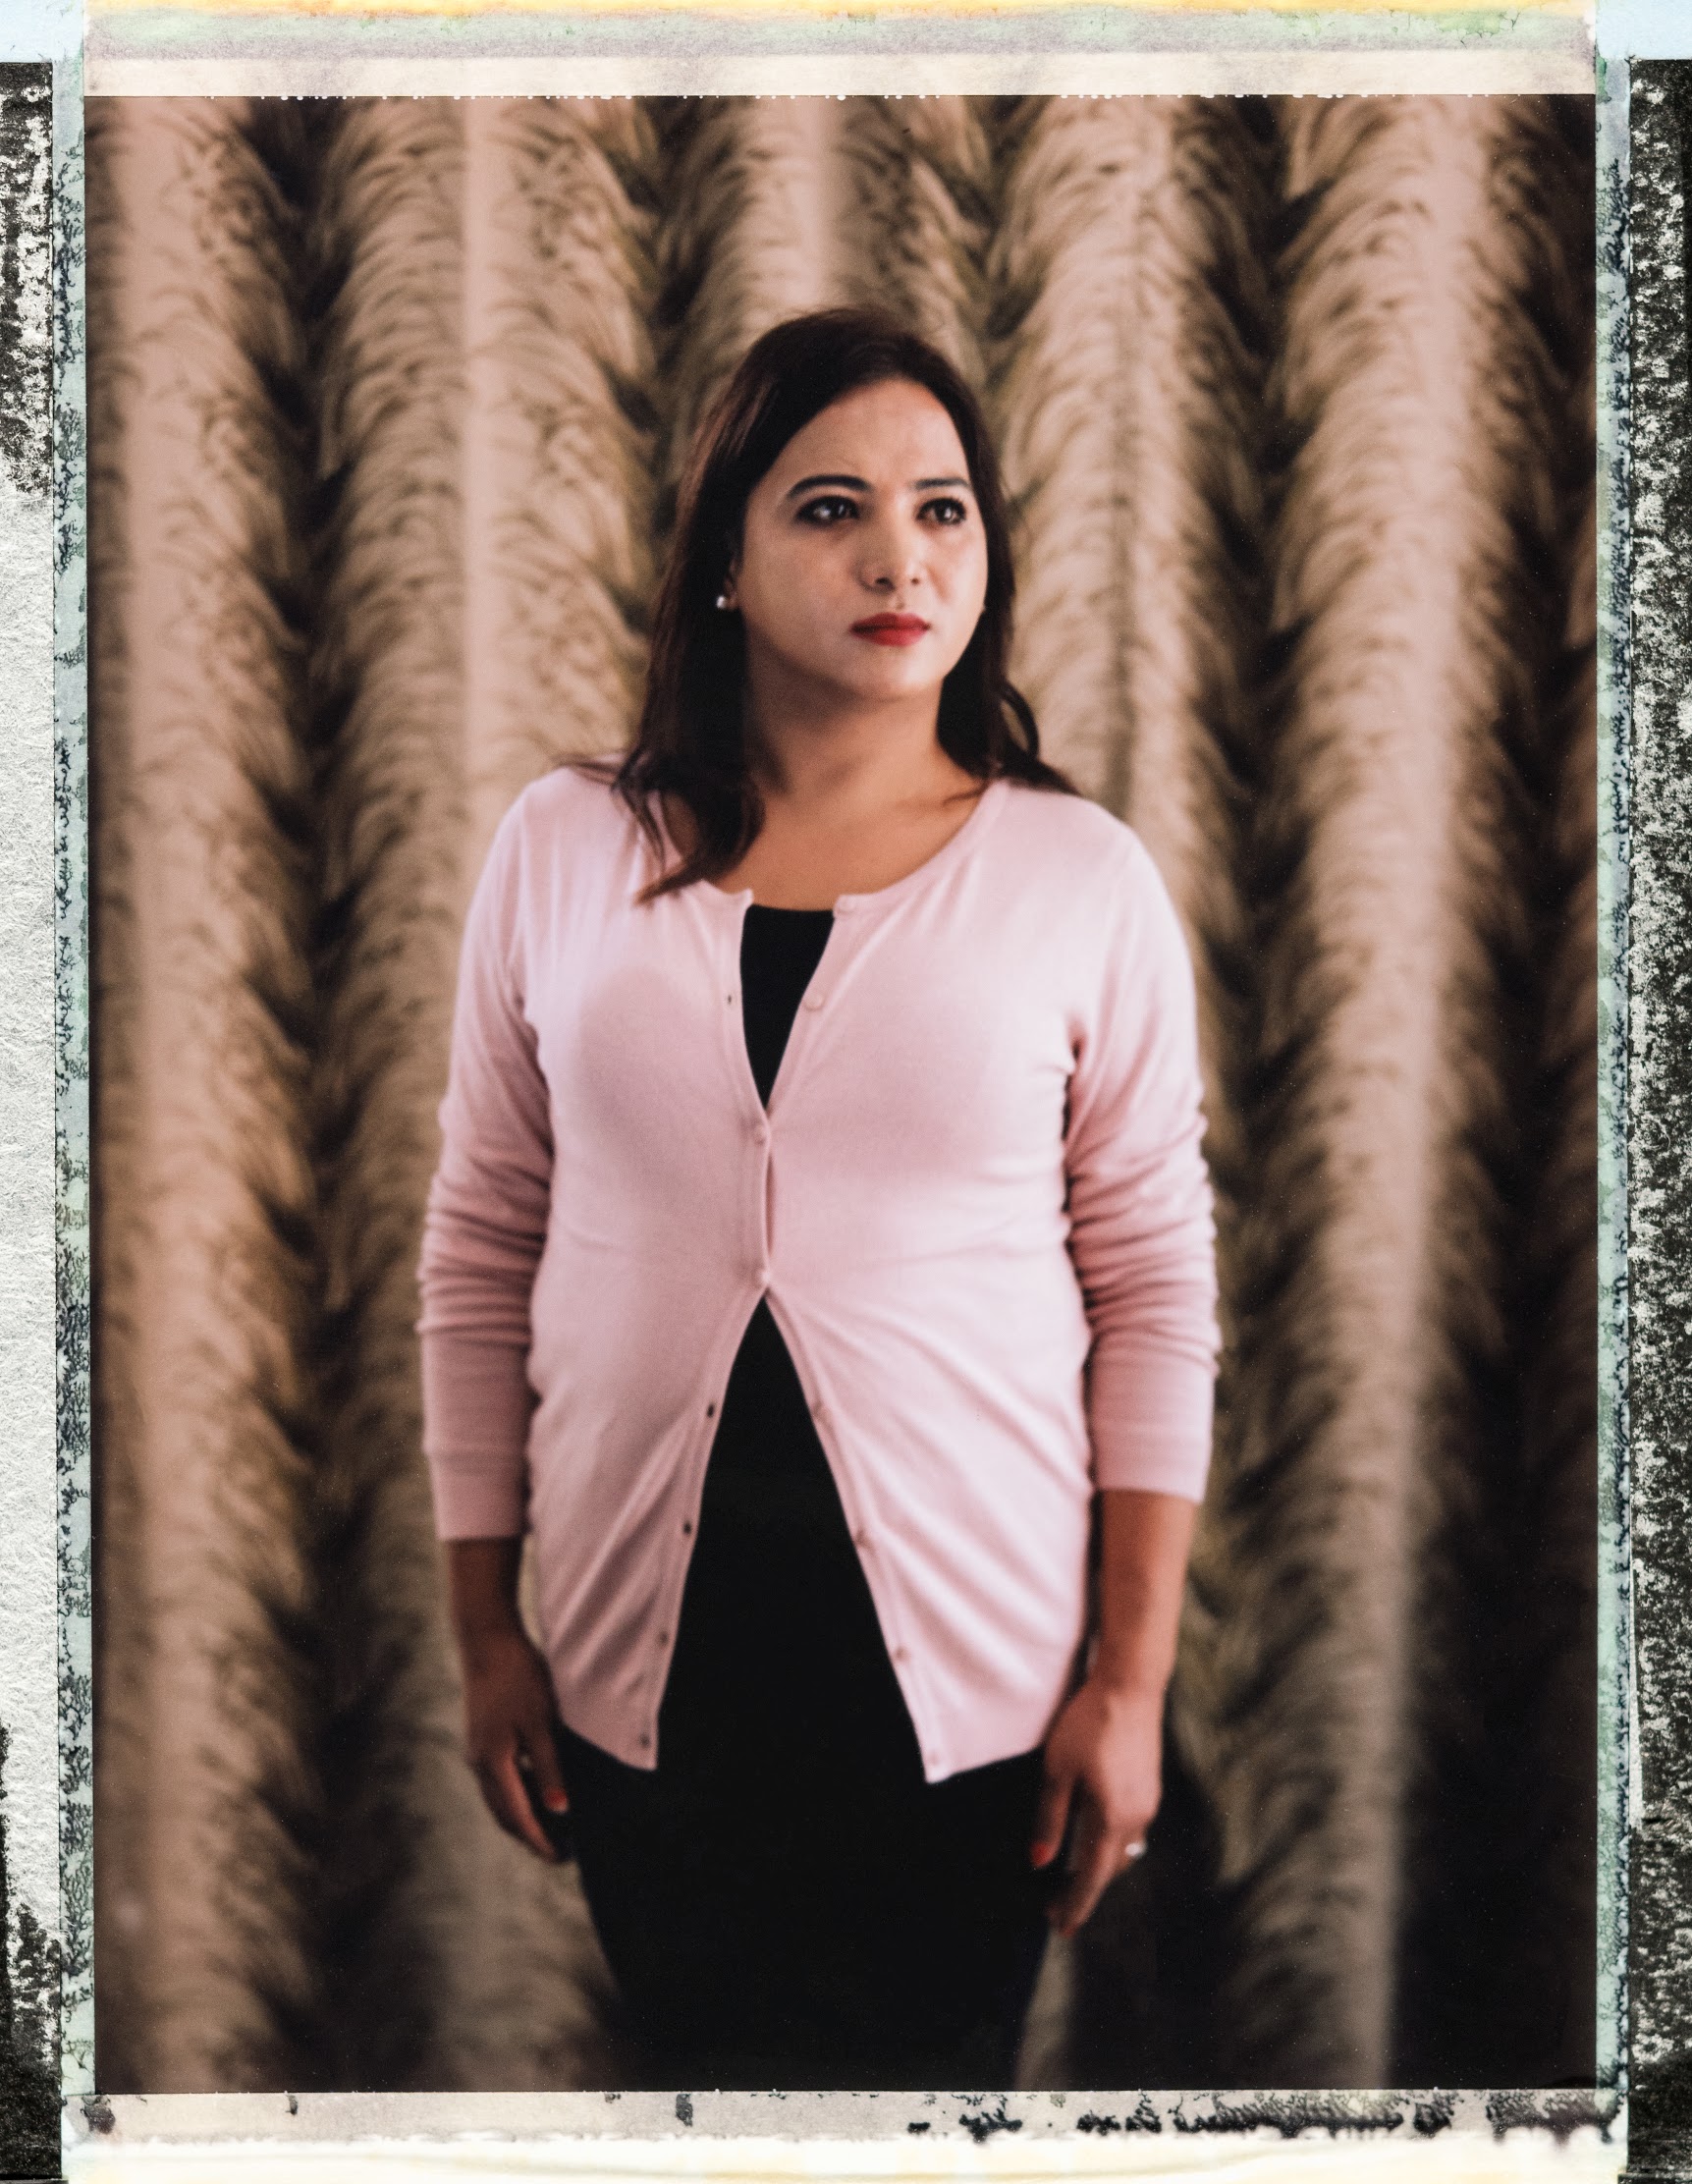 “I was born as a boy but my feeling was a girl,” says 32 year old Simran Sherchan, a trans woman and now National Program Co-ordinator for The Federation of Sexual and Gender Minorities, Nepal. As a child, with no exposure to open LGBTQI+ individuals or educational materials, she was confused about who she was. She then thought she was gay, until at 19, she read about transgender women: “When I realized I was trans - that was the happiest moment in my life. I realized I was not alone.” Simran’s family though wanted her to marry. ”I hid myself in Kathmandu so they couldn’t force me to marry her.” Without a job and family support, Simran descended into poverty. “I had to do sex work for money. For 6 or 7 months. When I was doing that I saw a lot of violence and problems. I really didn’t want to do sex work but I didn’t have other options.” Her experience on the street led her to Blue Diamond Society, a LGBTI organisation in Kathmandu. They offered her a job as an outreach worker. “I left sex work and started my new life. Now i go everywhere for the LGBT community.” When asked what she wants for the future she says “I hope people will accept LGBTI people more now. If we stay in the dark side nobody can see us, we must come into the light show the people that we exist, we are also beautiful.” Nepal's current LGBTQI+ laws are some of the most open in the world – including the legal recognition of a third gender. Tangible implementation of the various government orders has been piecemeal though, a 2014 United Nations report noted. And government officials have continued to harass LGBT groups, including by alleging that organizing around homosexuality is illegal in the country. Furthermore, while laws are progressive, discrimination is wide spread, especially within families, where marriage between a man and a woman and the bearing of children are expected of young Nepalese. Katmandu, Nepal. 30 October 2018. Photo Robin Hammond/Witness Change